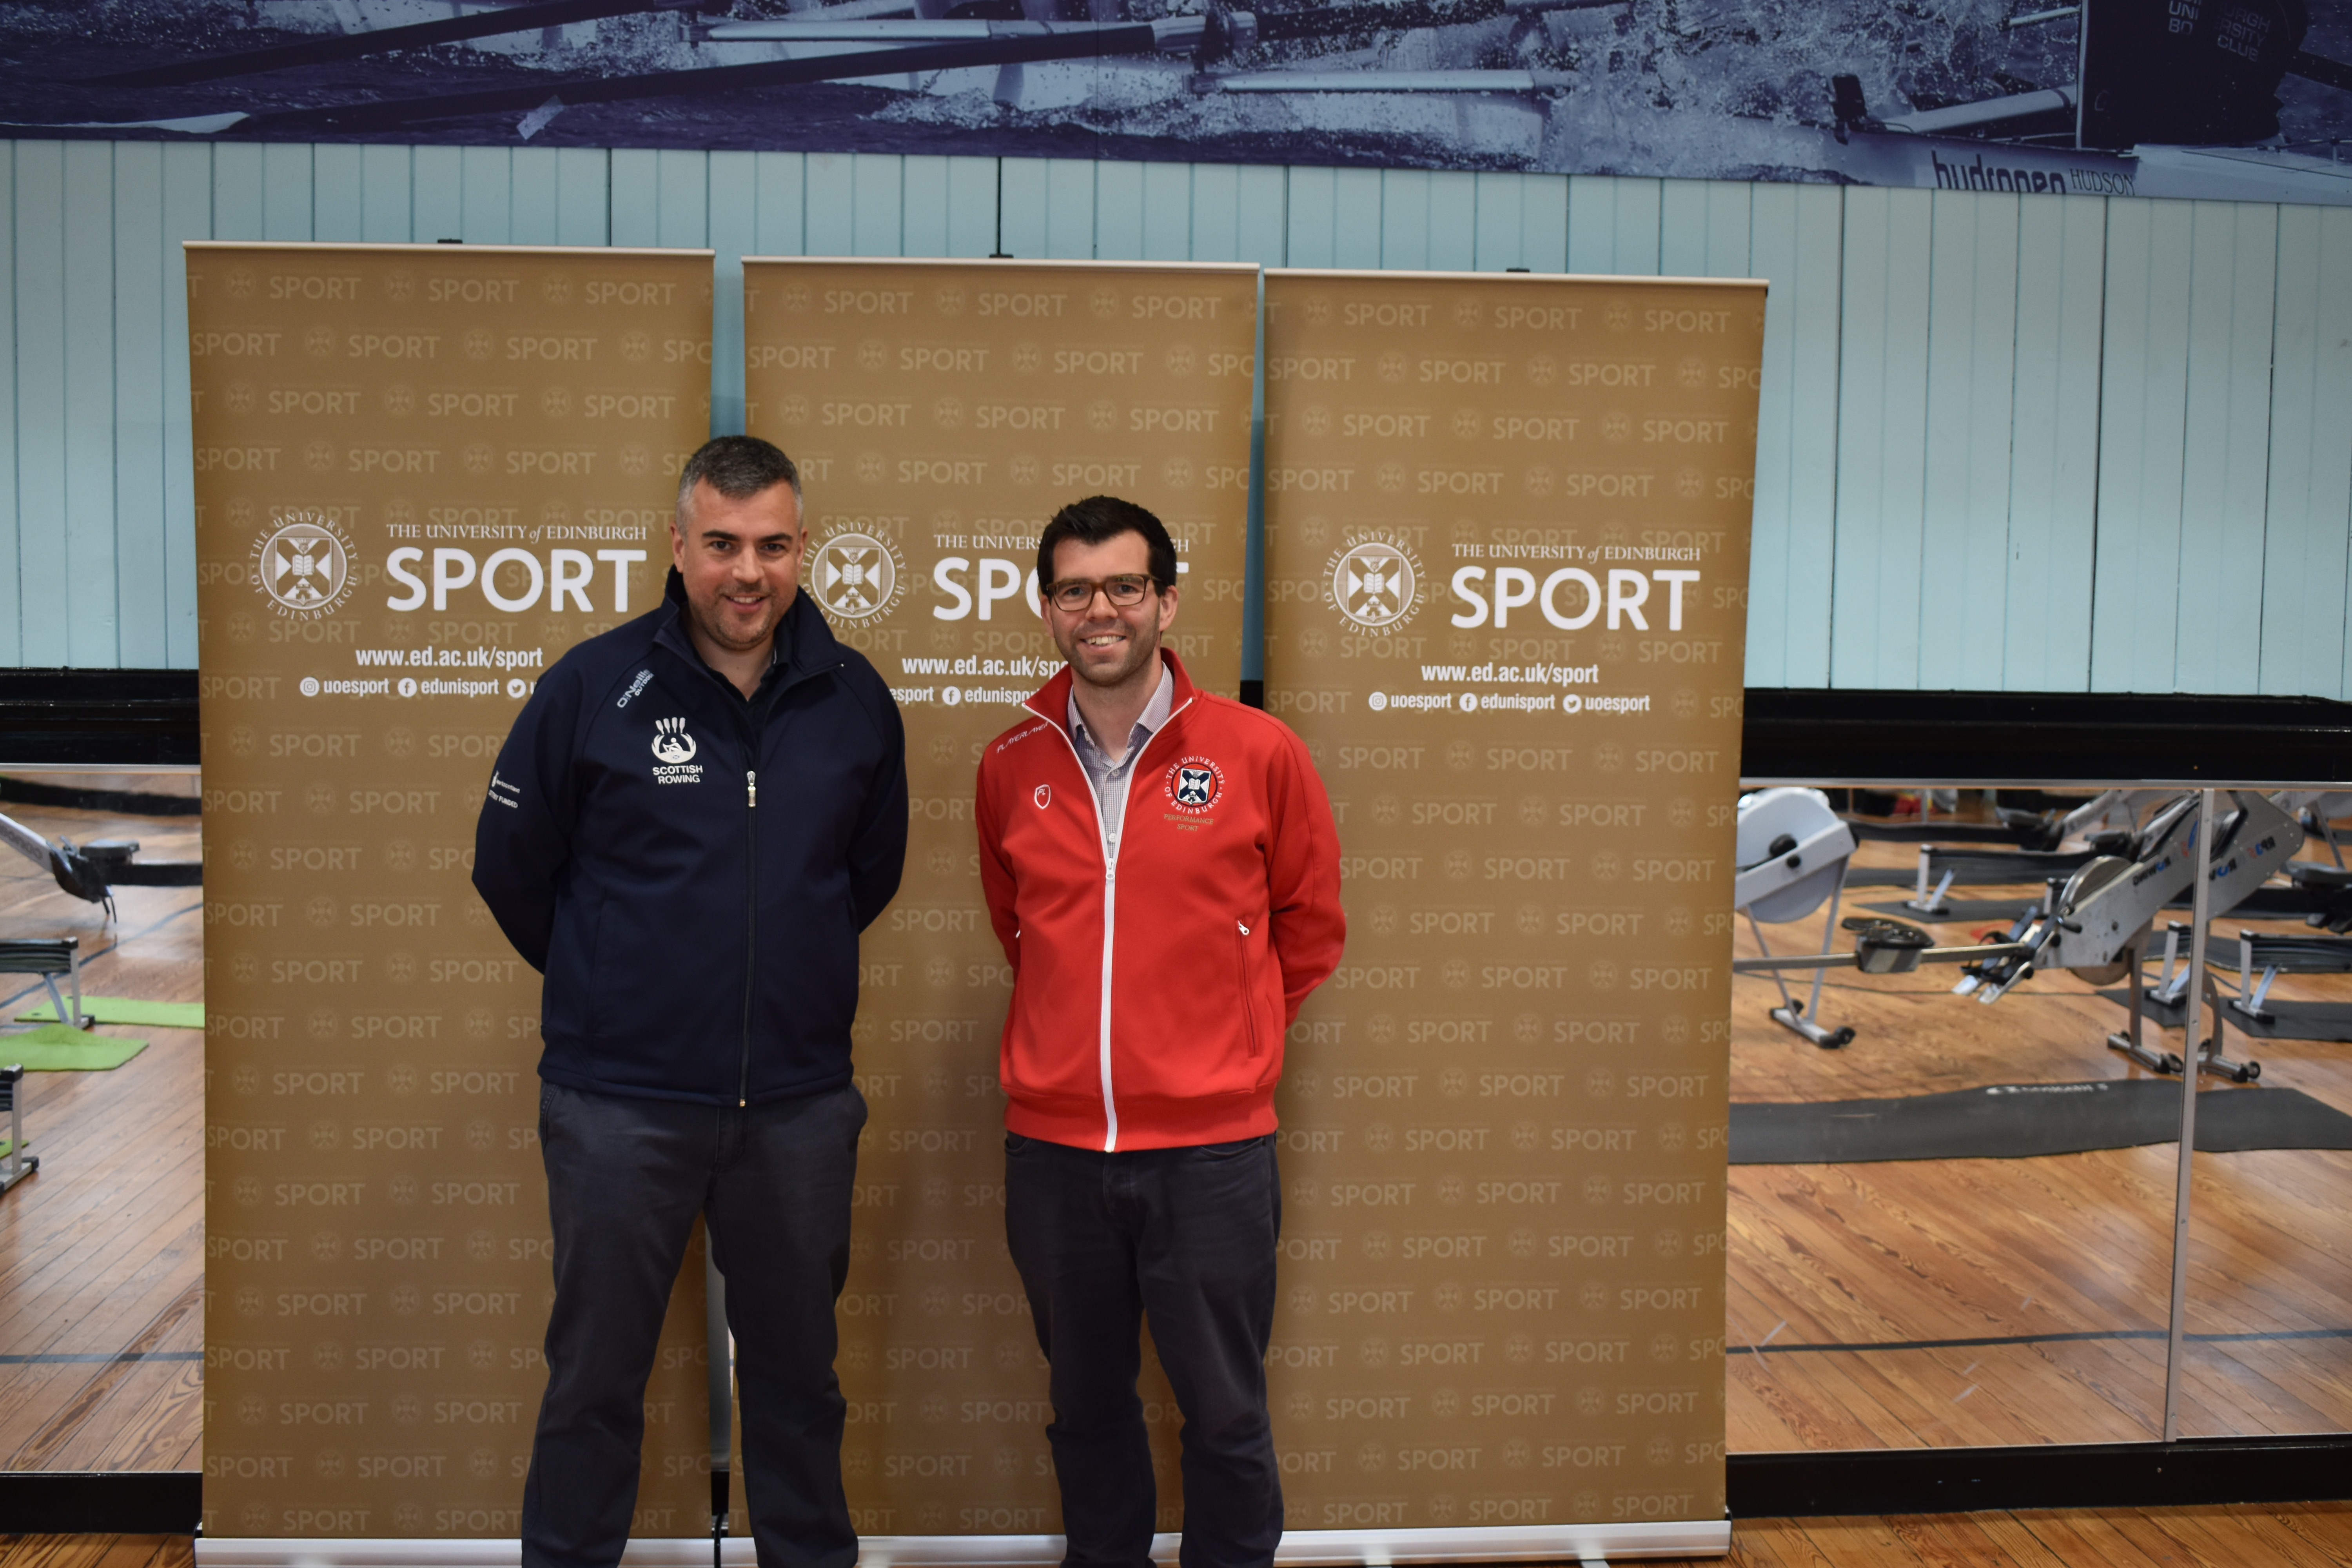 Image 1  (Left to right)   Lee Boucher, Head of Performance Pathway, Scottish Rowing and Ross Simpson, Assistant Director and Head of Sport, The University of Edinburgh